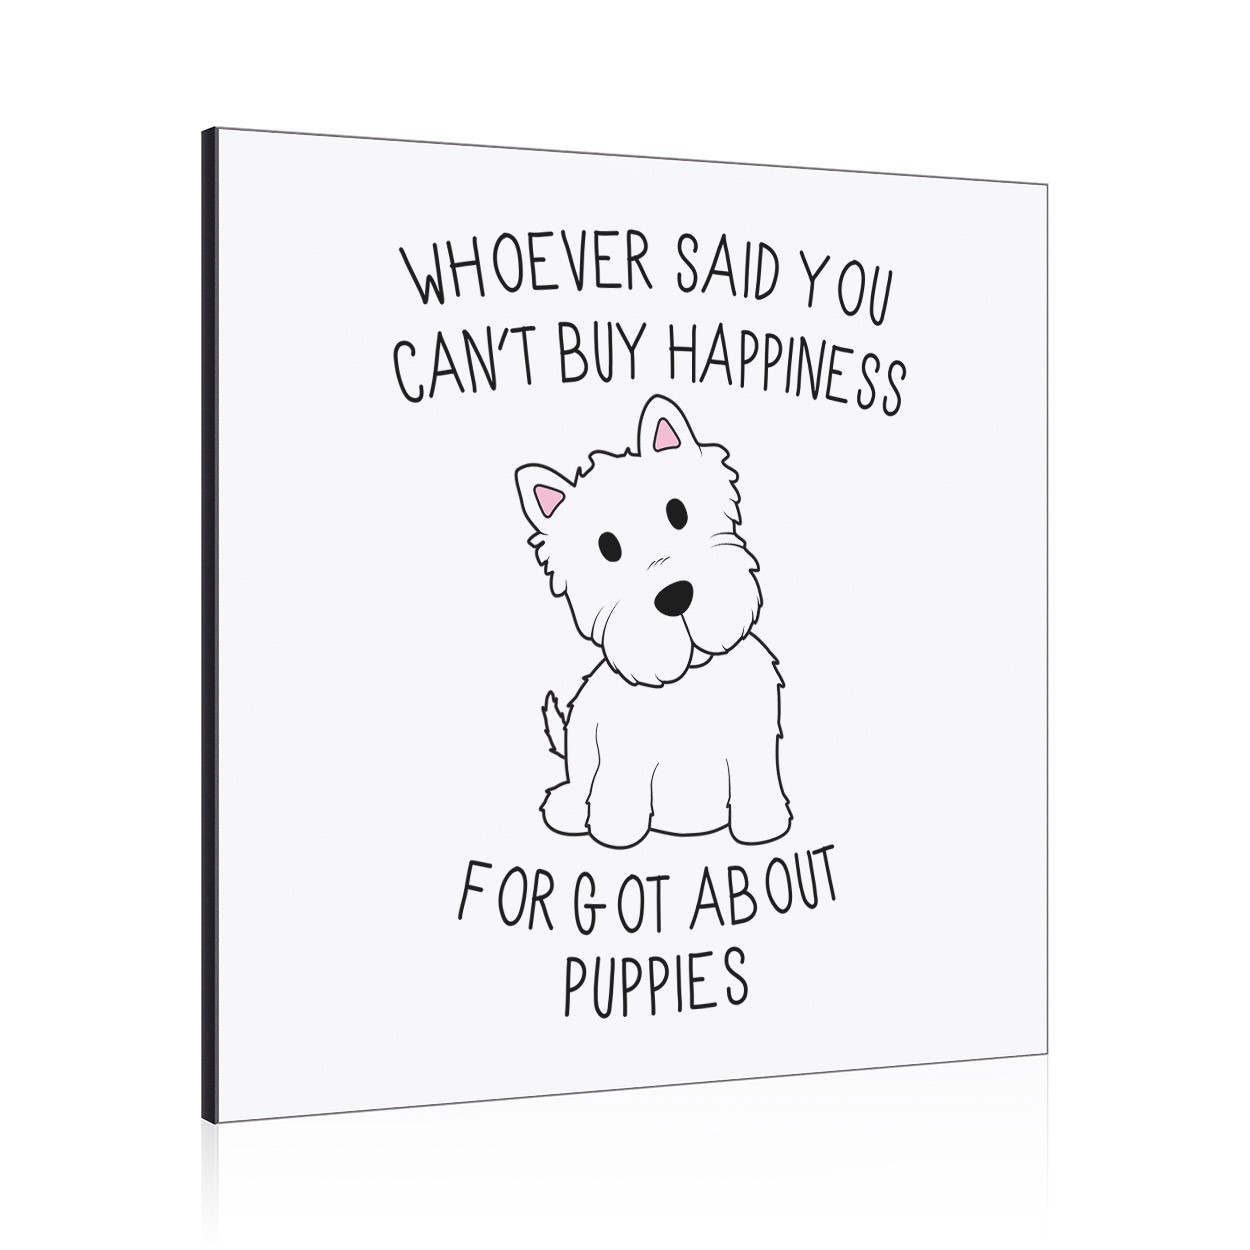 Whoever Said You Can't Buy Happiness Forgot About Puppies Wall Art Panel